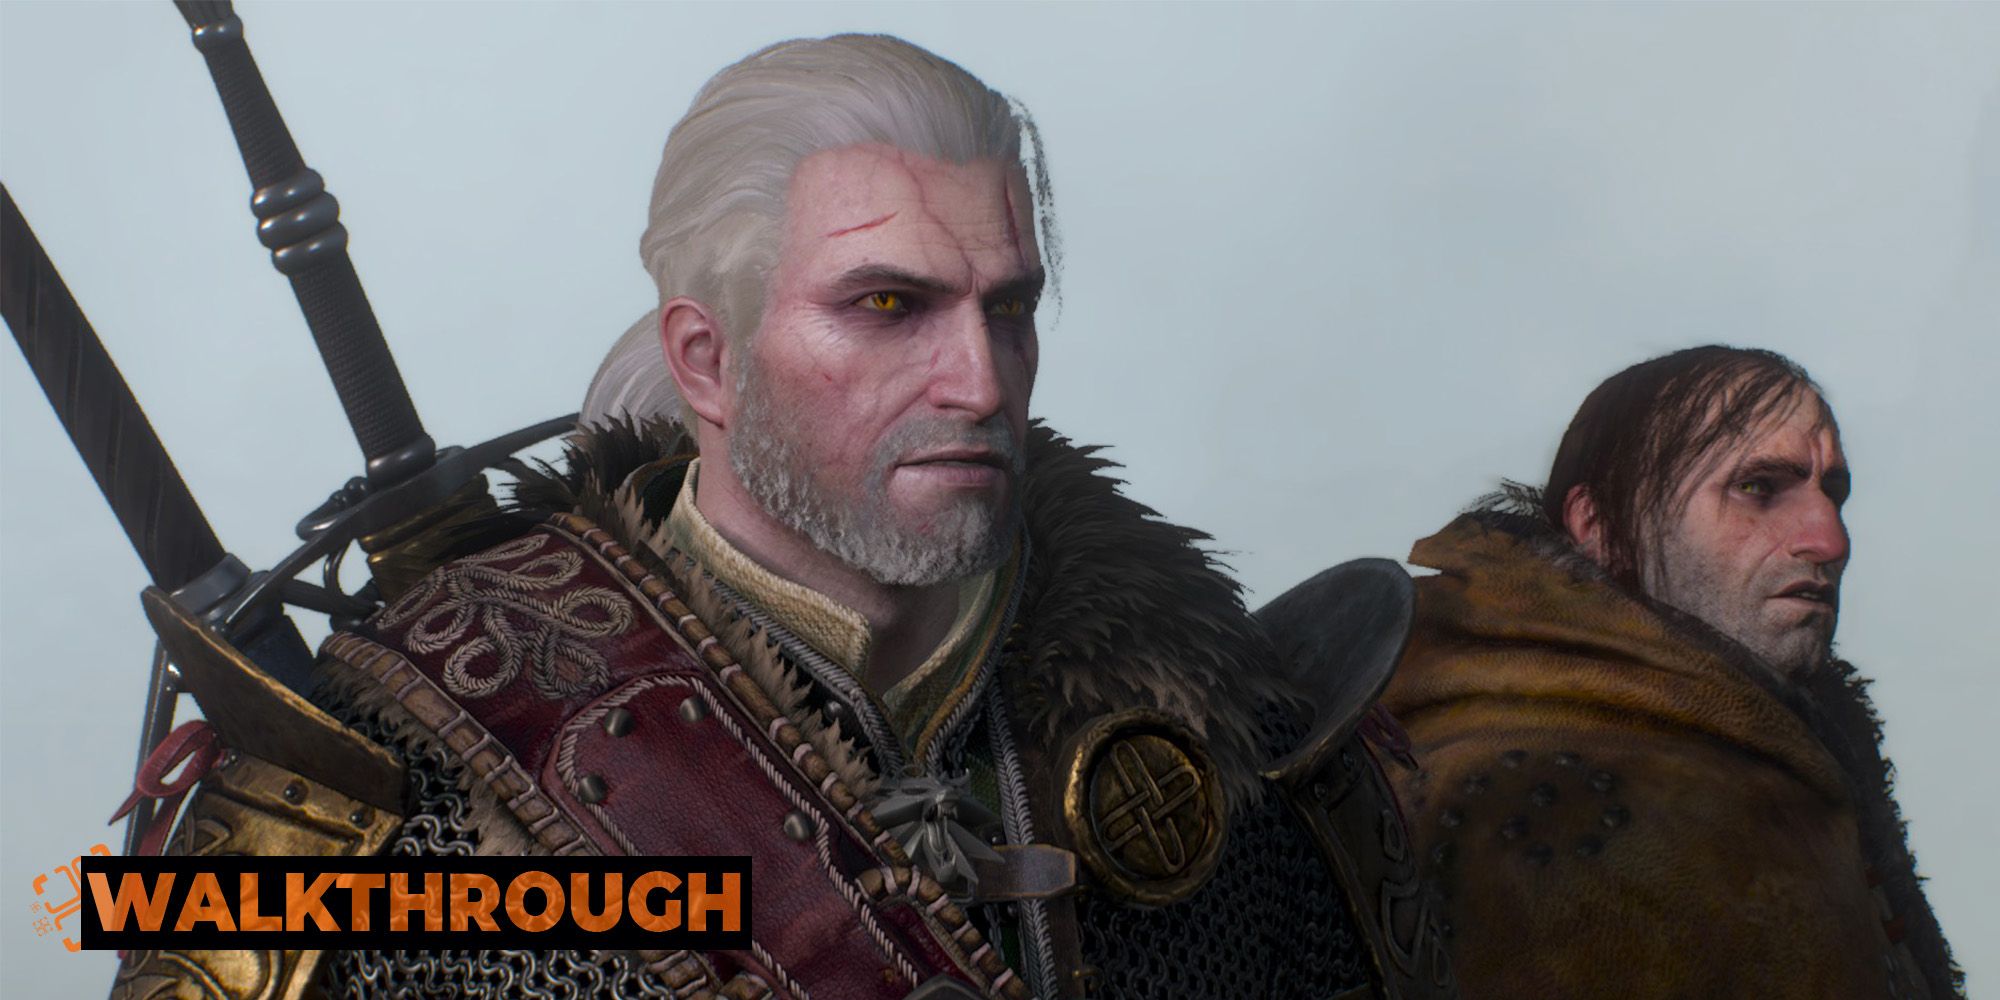 The Witcher 3 Quest Guide: King's Gambit